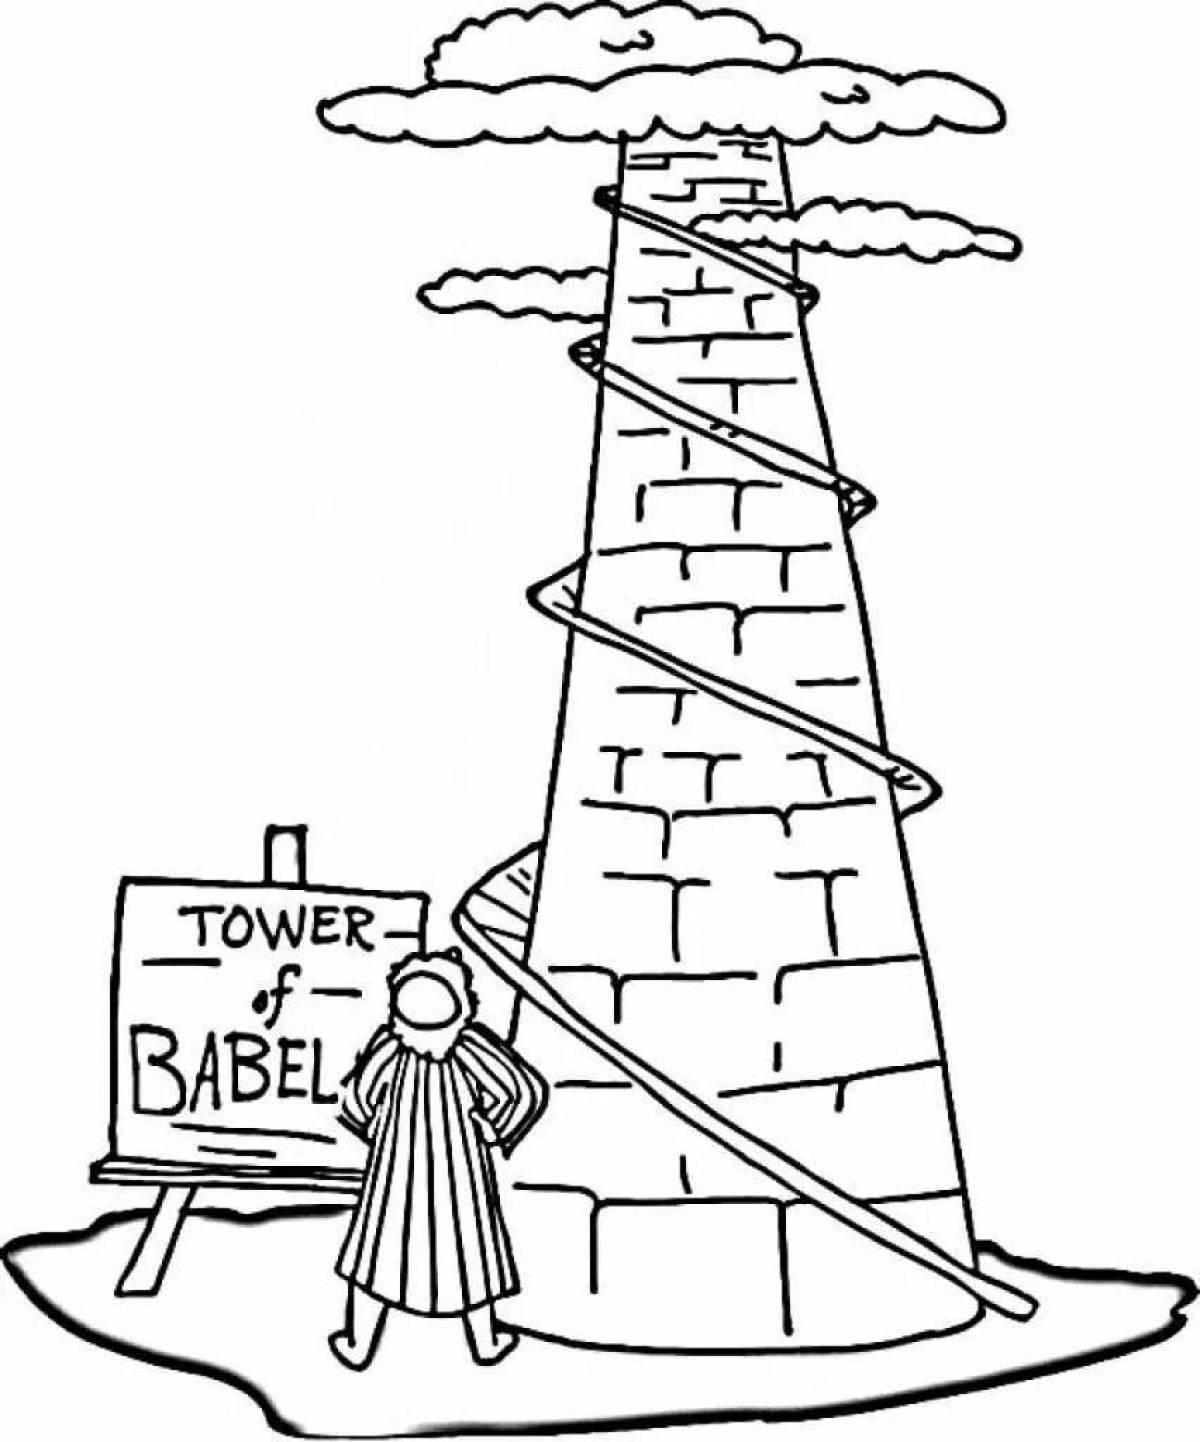 Tower of Babel for kids #3